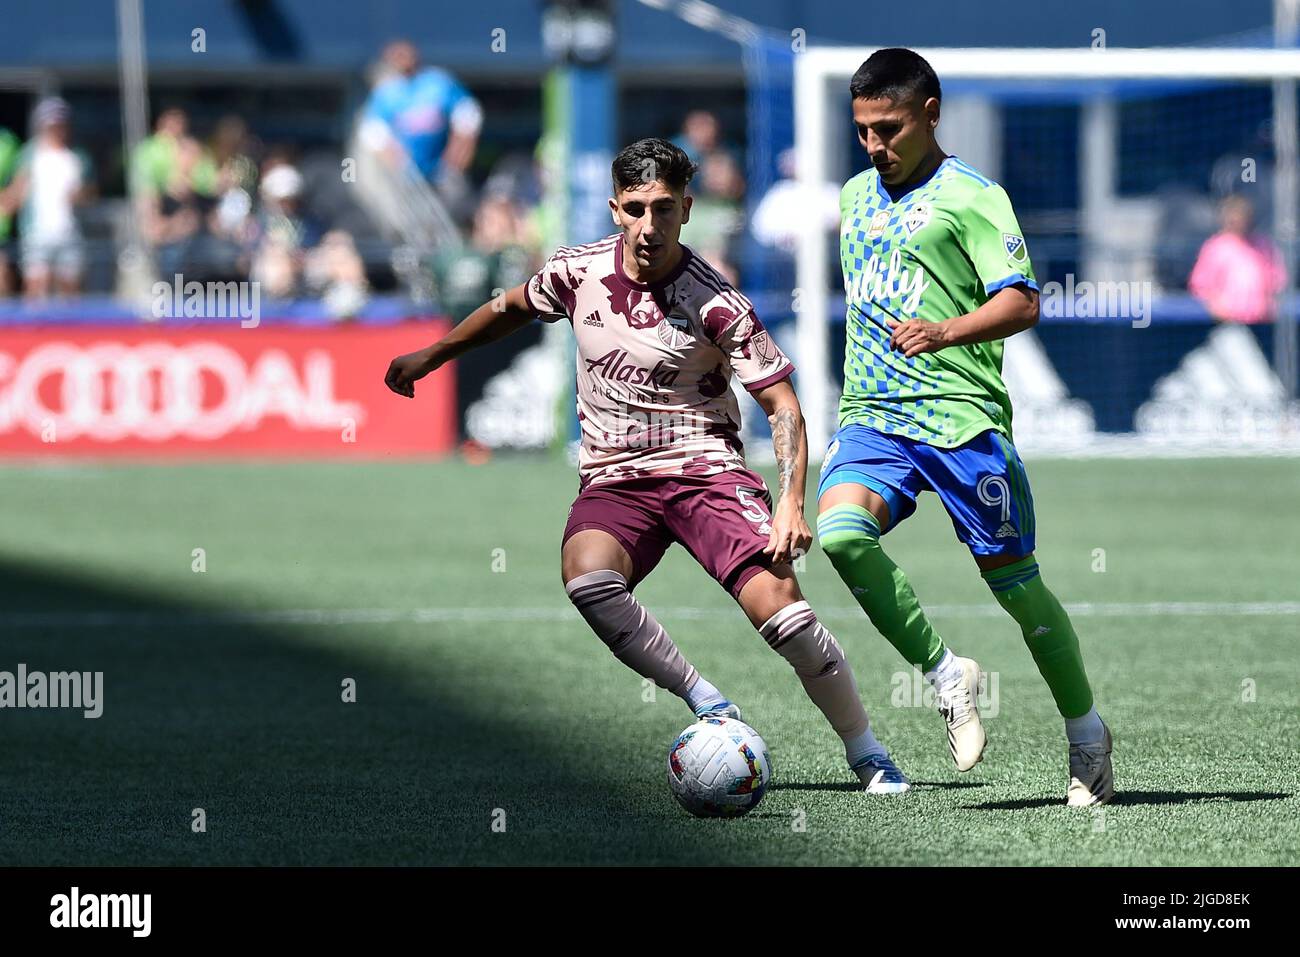 Seattle, WA, USA. 09th July, 2022. Portland Timbers defender Claudio Bravo dribbles the ball ahead of Seattle Sounders forward Paul Ruidiaz during the MLS soccer match between the Portland Timbers and Seattle Sounders FC at Lumen Field in Seattle, WA. Portland defeated Seattle 3-0. Steve Faber/CSM/Alamy Live News Stock Photo